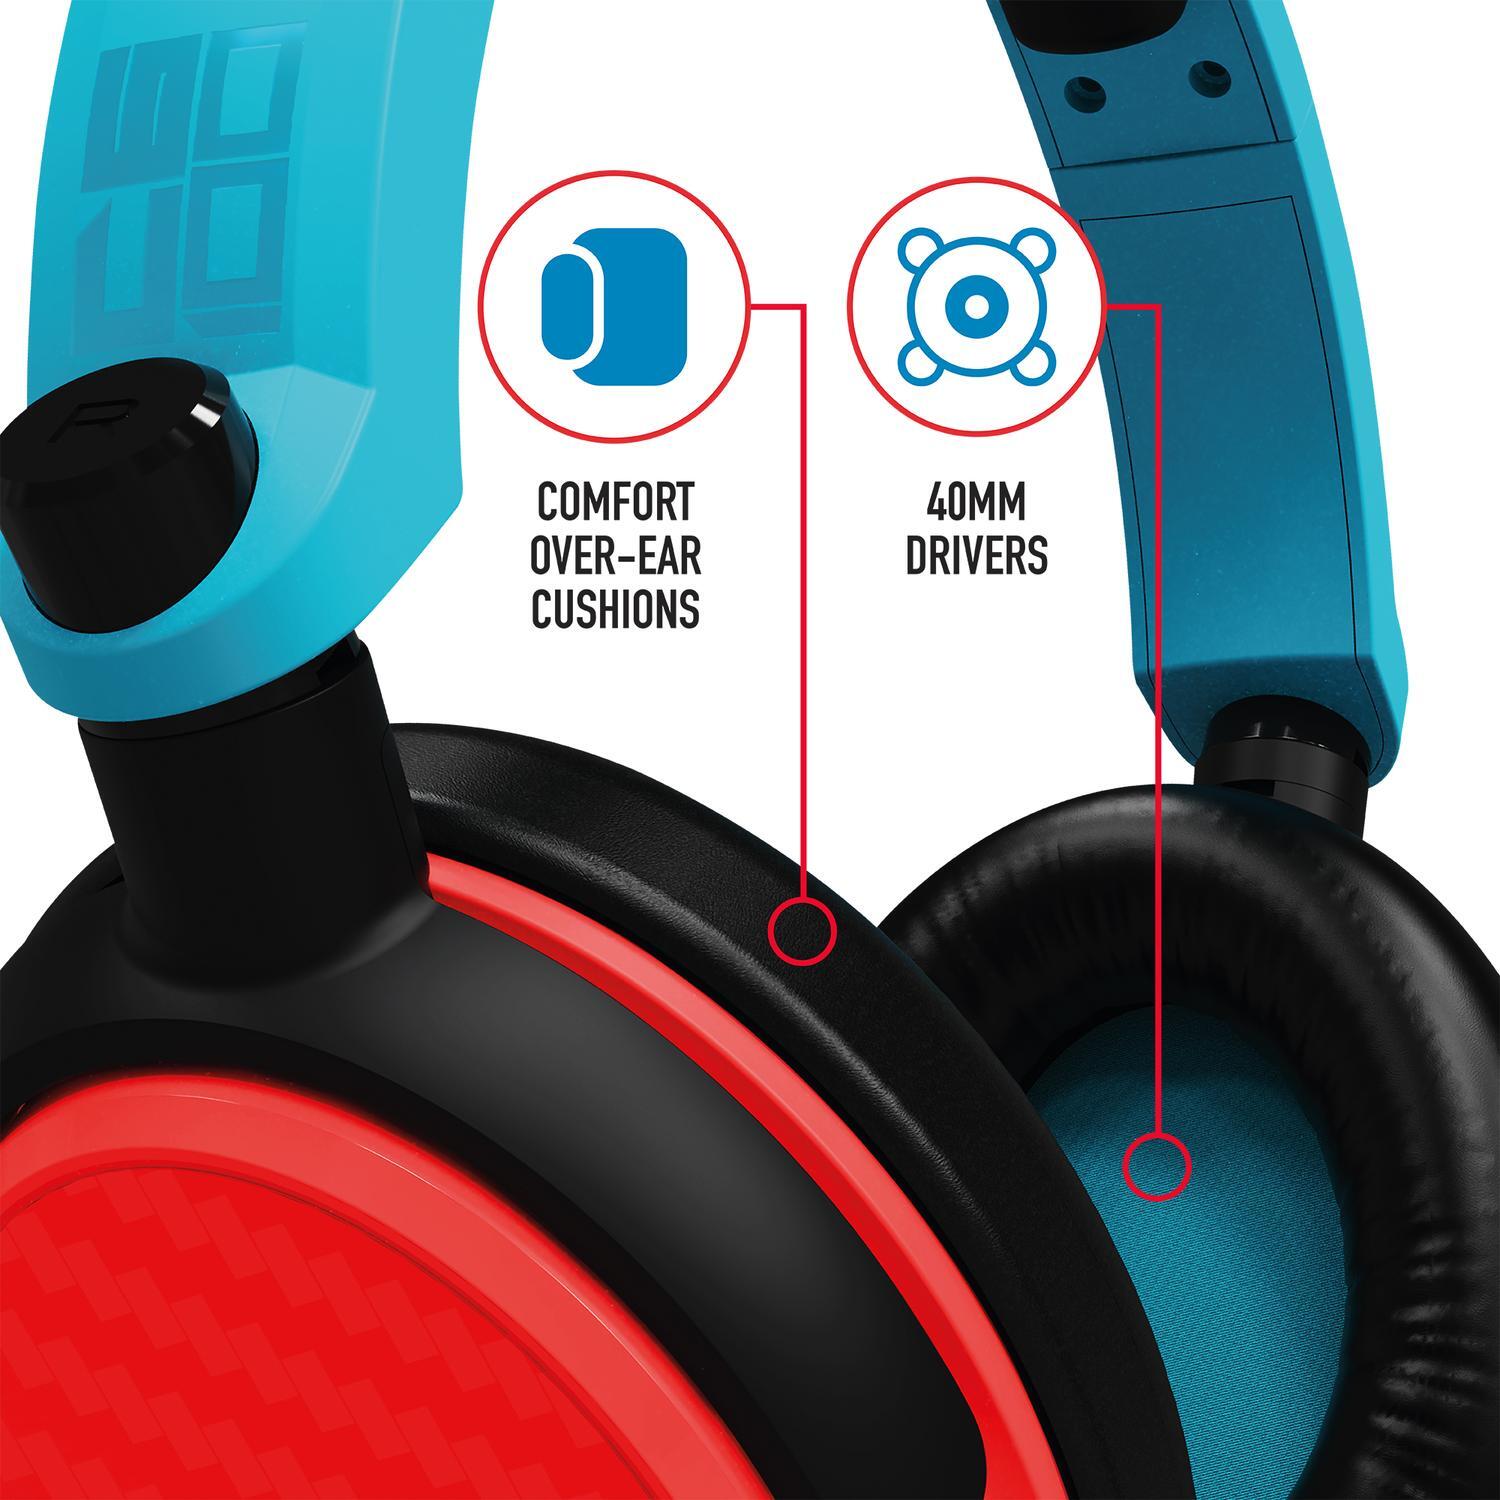 Stealth C6-100 Gaming Headset for Switch, XBOX, PS4/PS5, PC - Neon Blue/Red  - Elgiganten